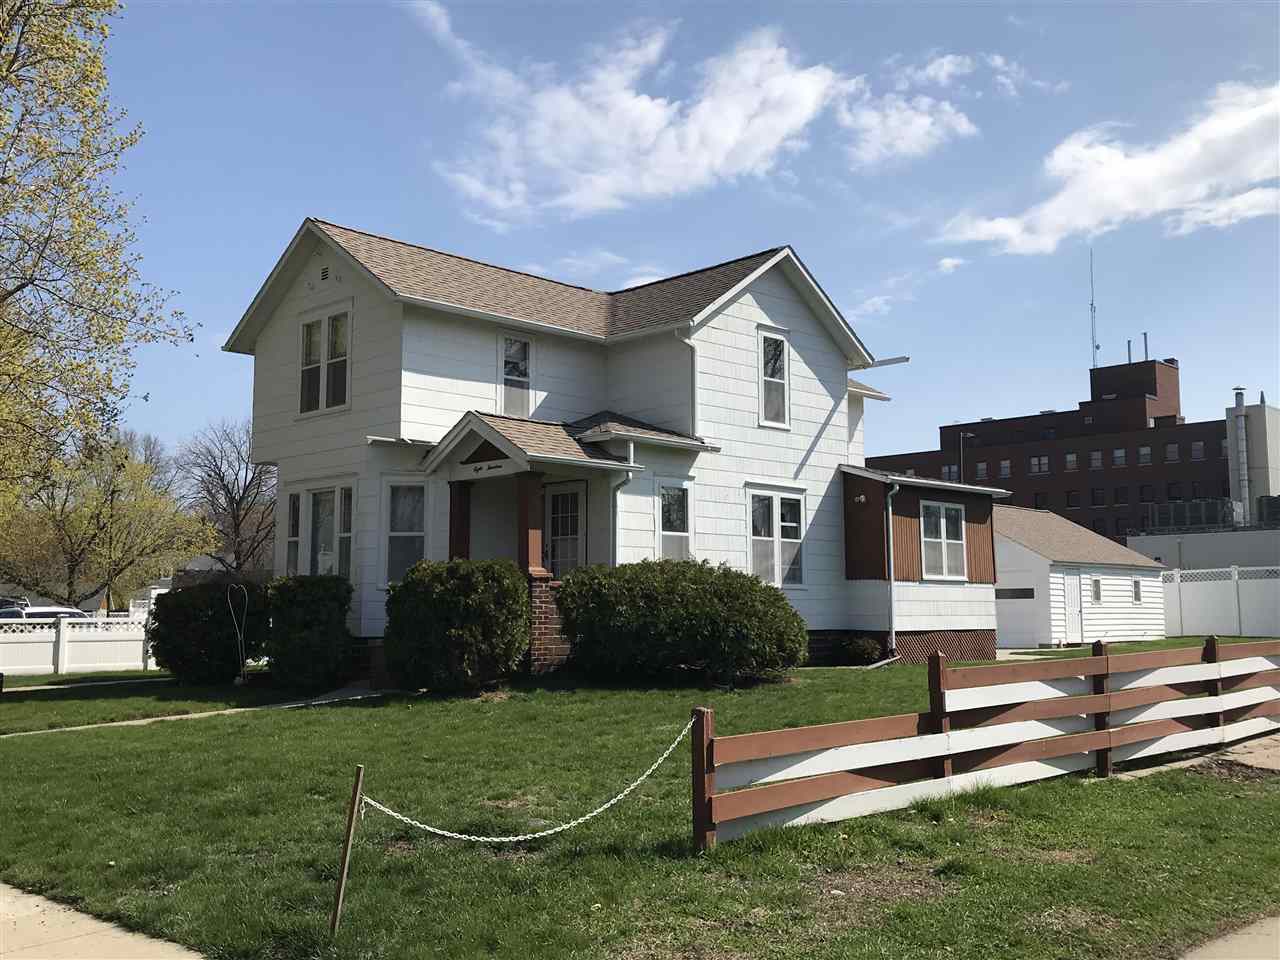 RESIDENTIAL for Sale at 7th